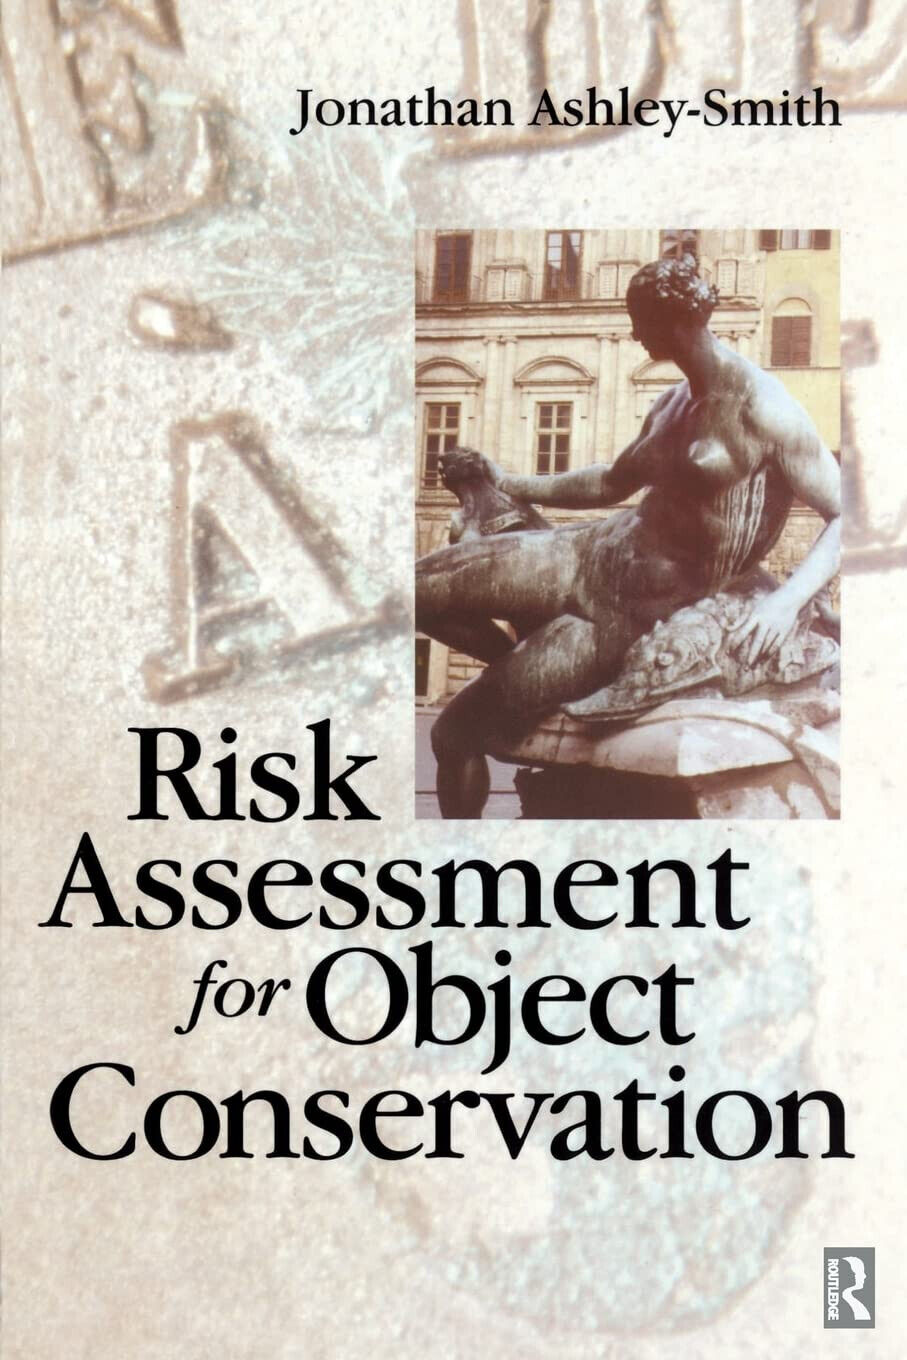 Risk Assessment for Object Conservation - Jonathan Ashley-Smith - 1999 libro usato